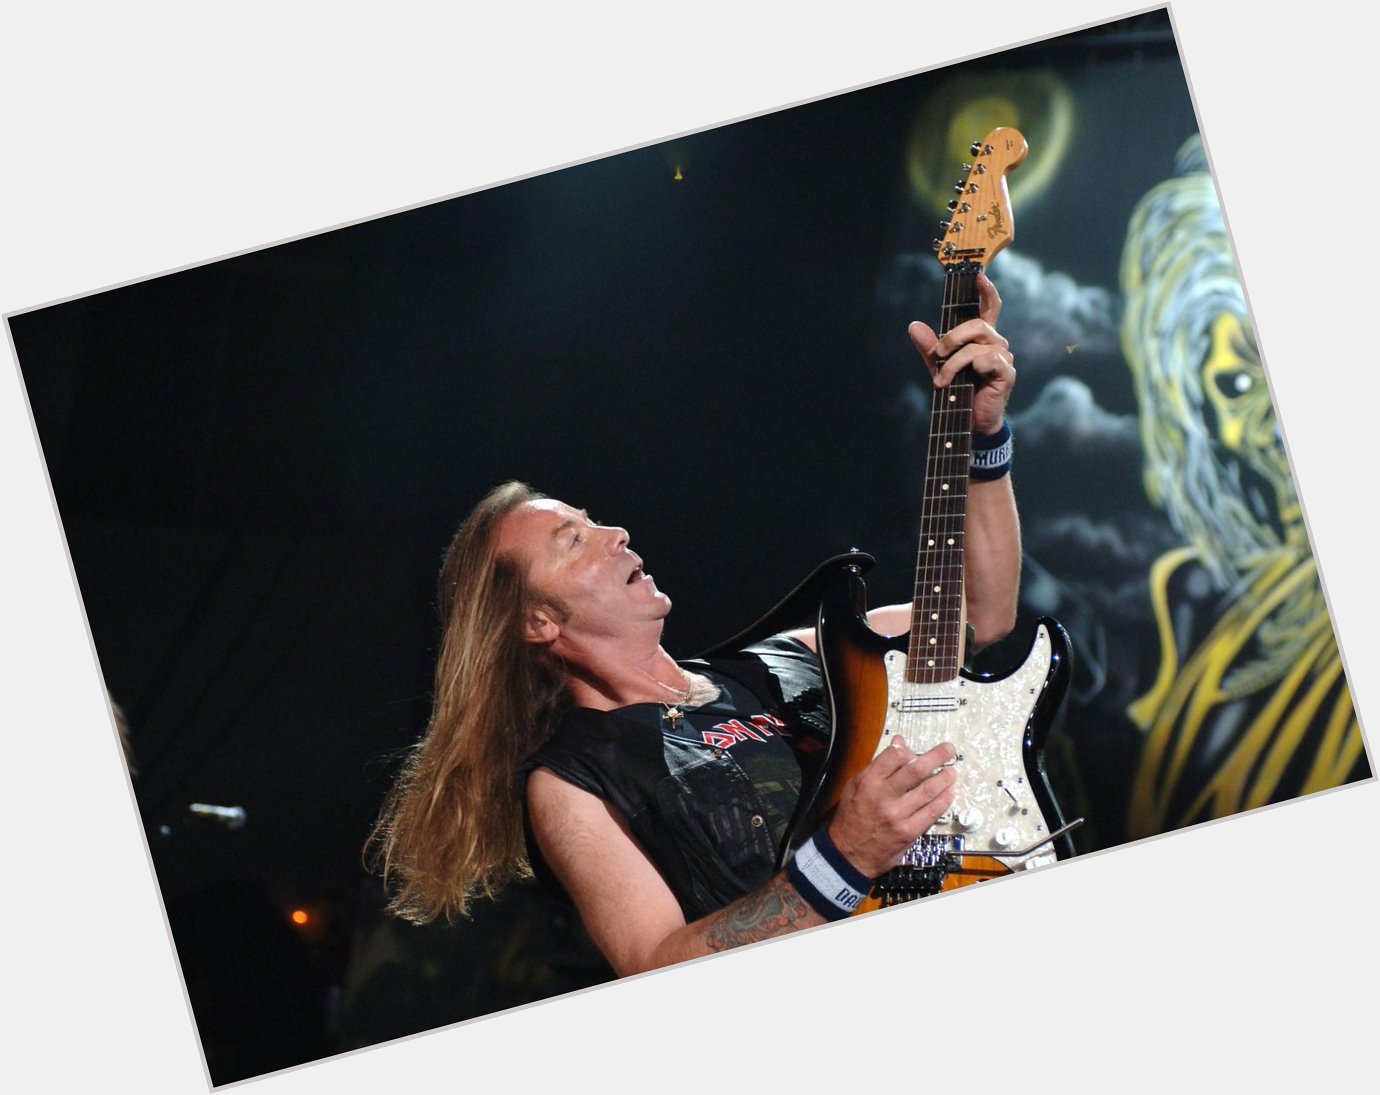 Join us to wish a Happy Birthday to the incredible shredder, Dave Murray of IronMaiden!   